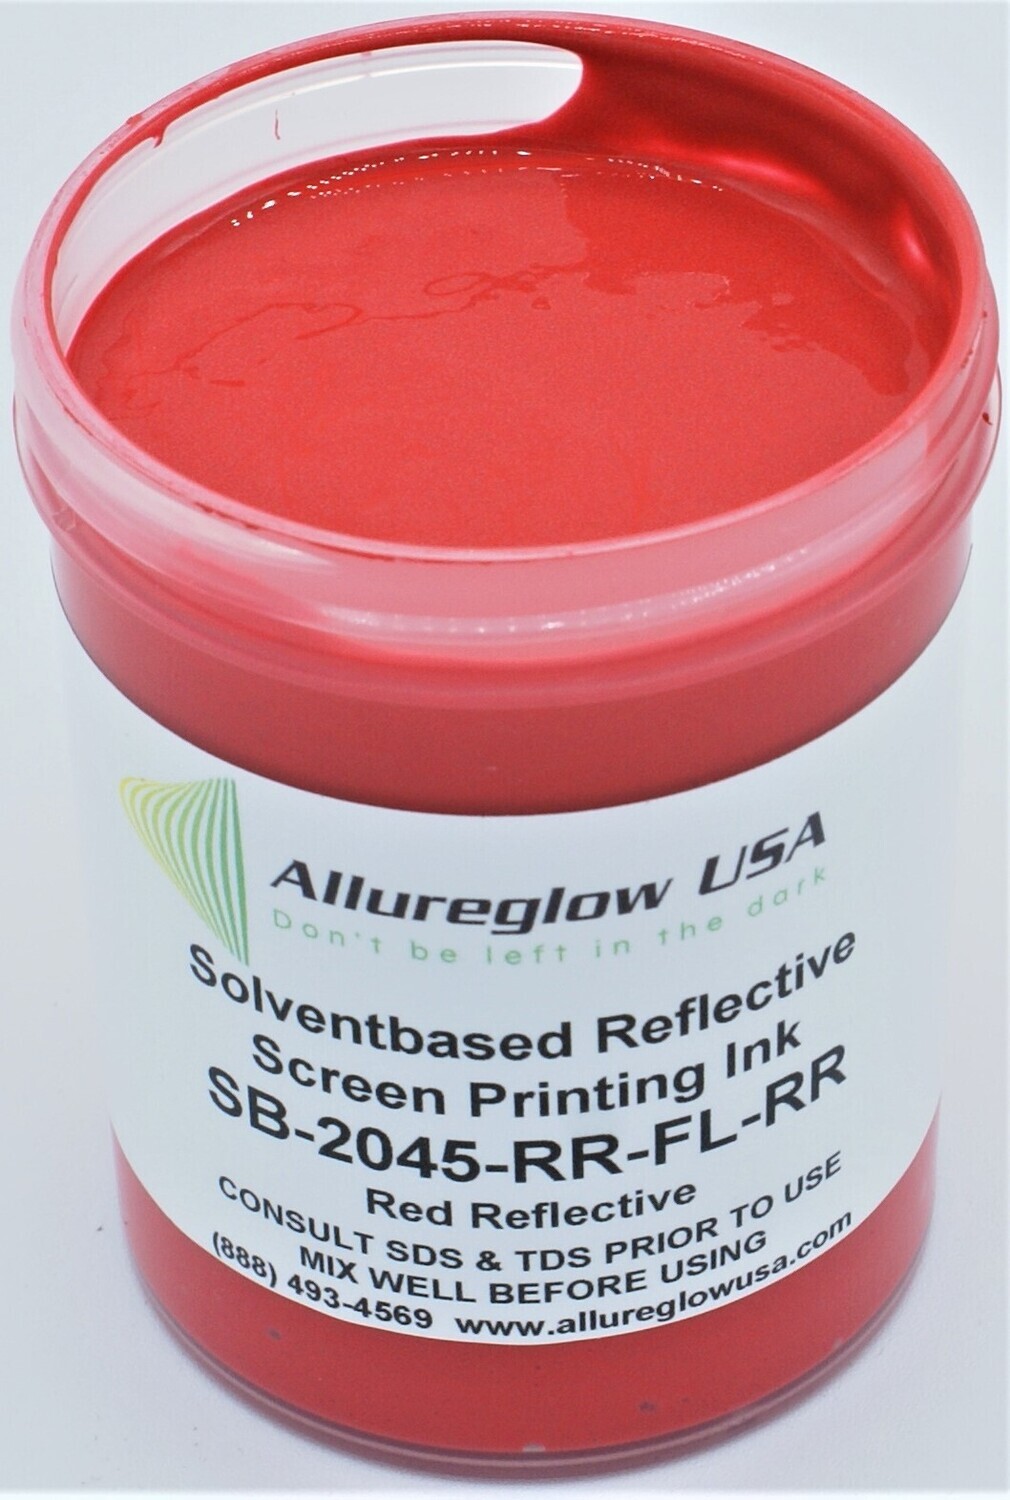 SB-2045-RR-FL-RR-GL   SOLVENT BASED RED REFLECTIVE SCREEN PRINTING INK -  GALLON